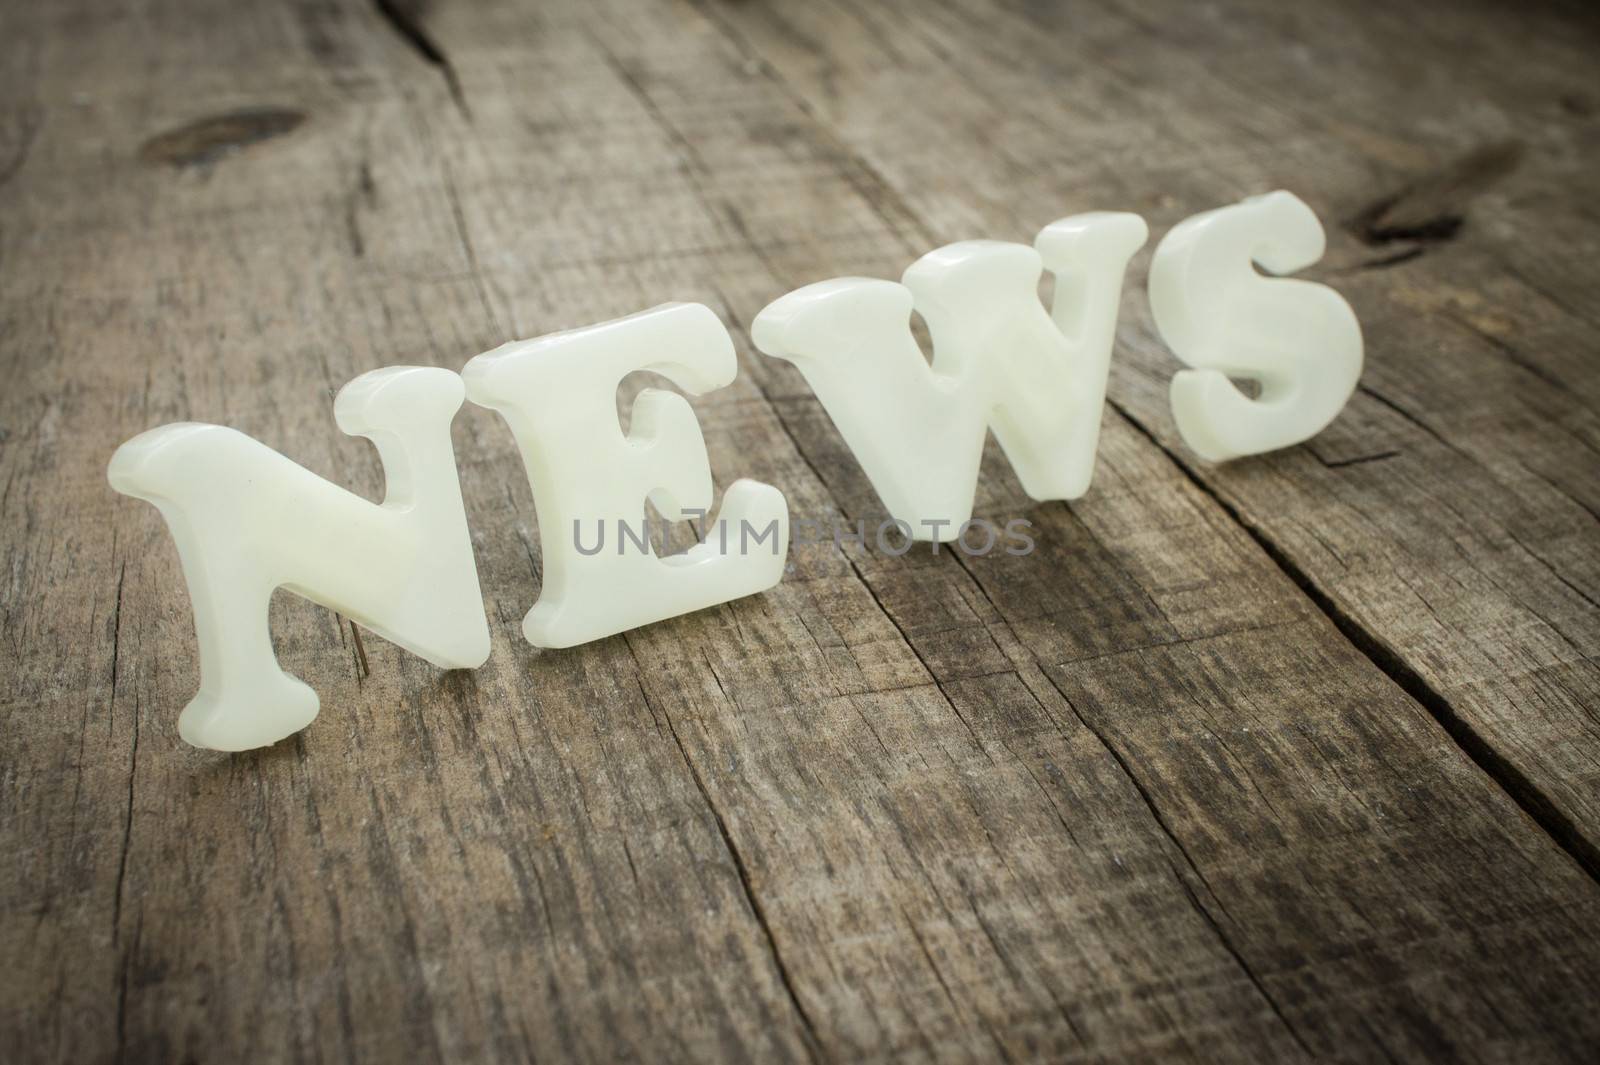 News out of plastic letters on wood background